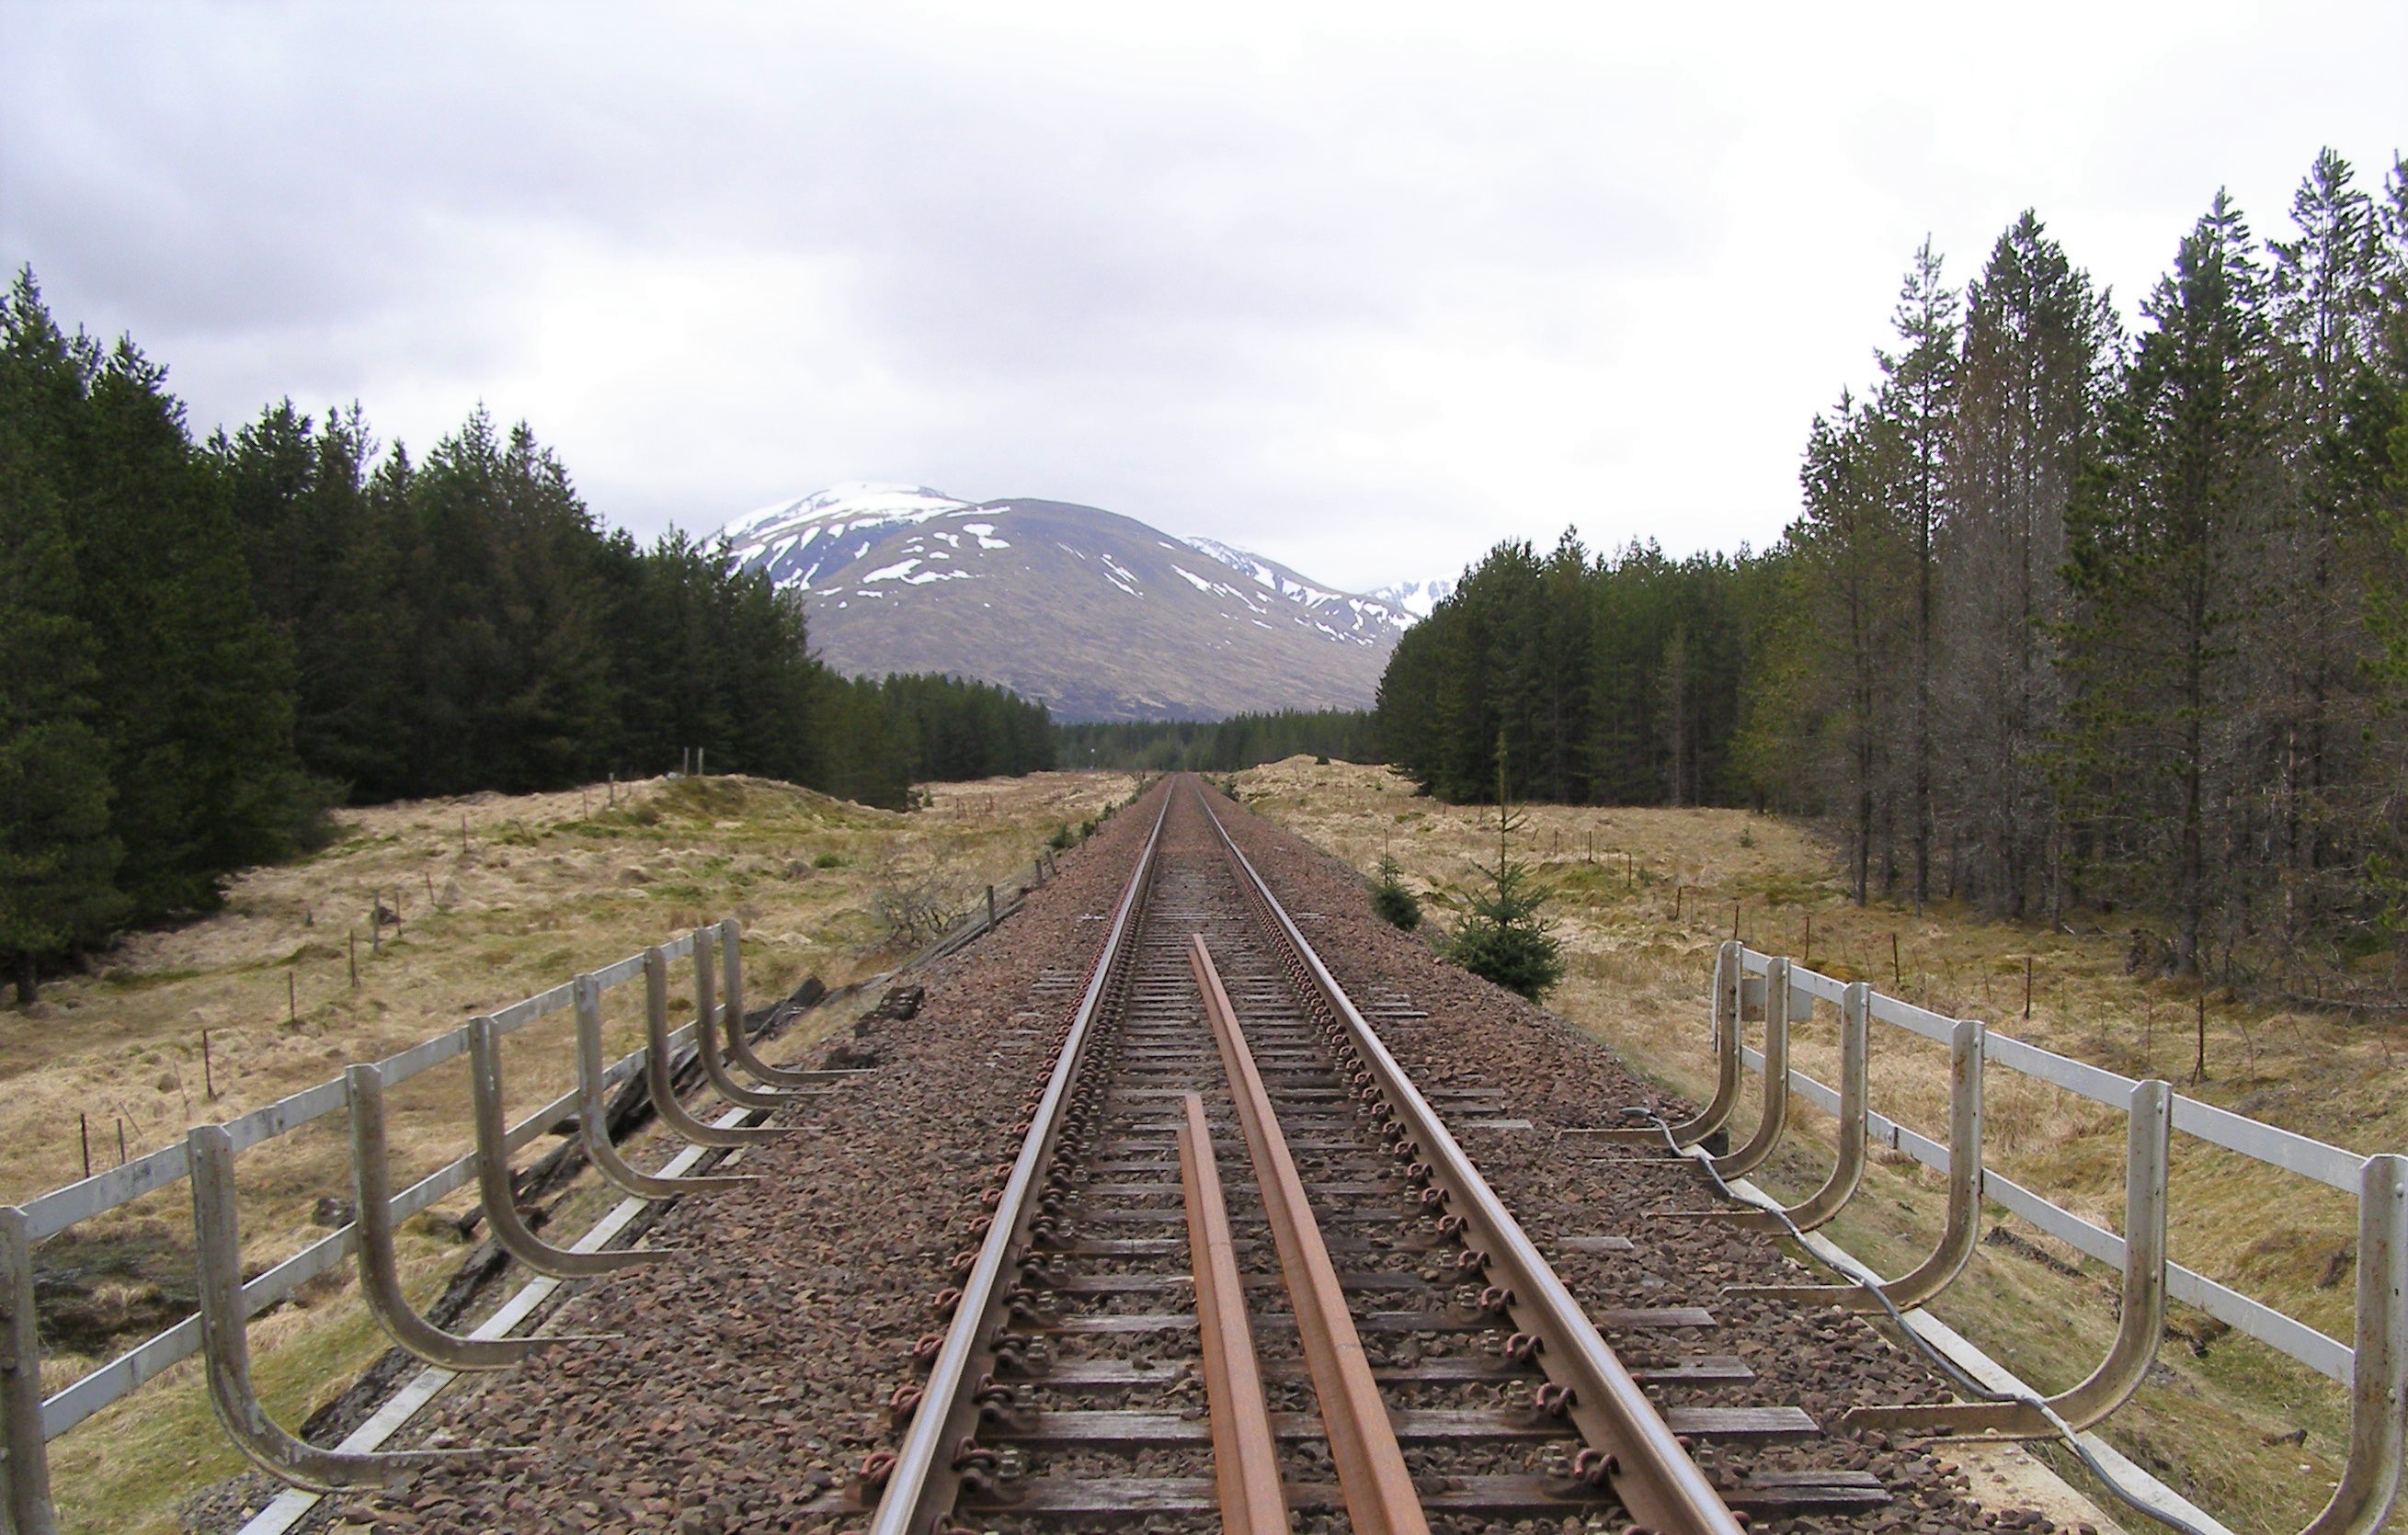 Rannoch timber rail project “on track” says Ewing